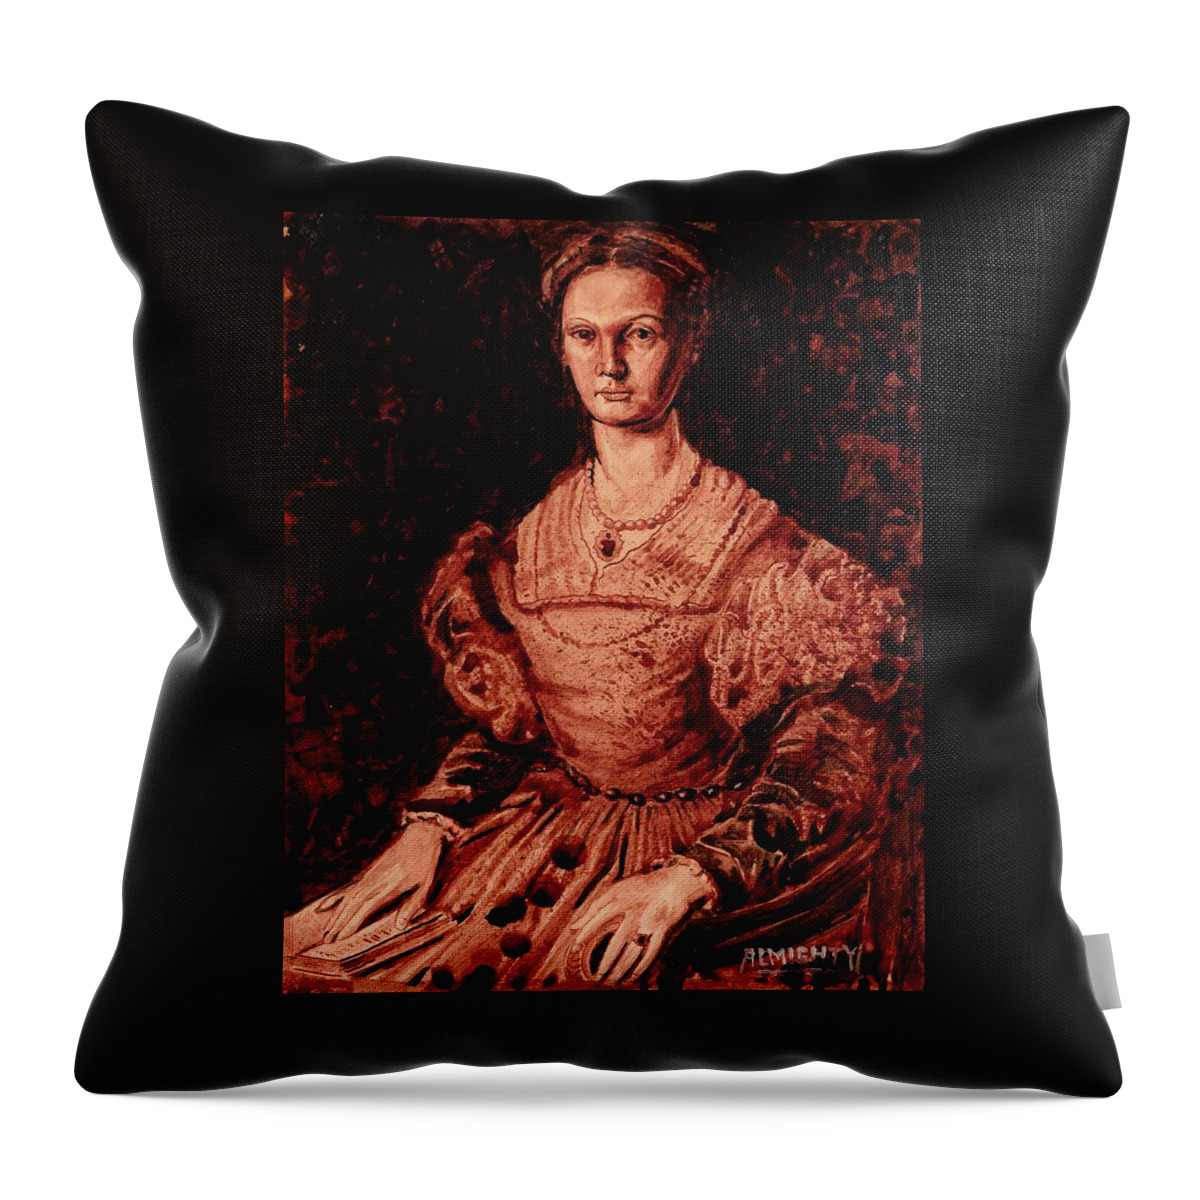 Ryan Almighty Throw Pillow featuring the painting Elizabeth Bathory -dry blood by Ryan Almighty